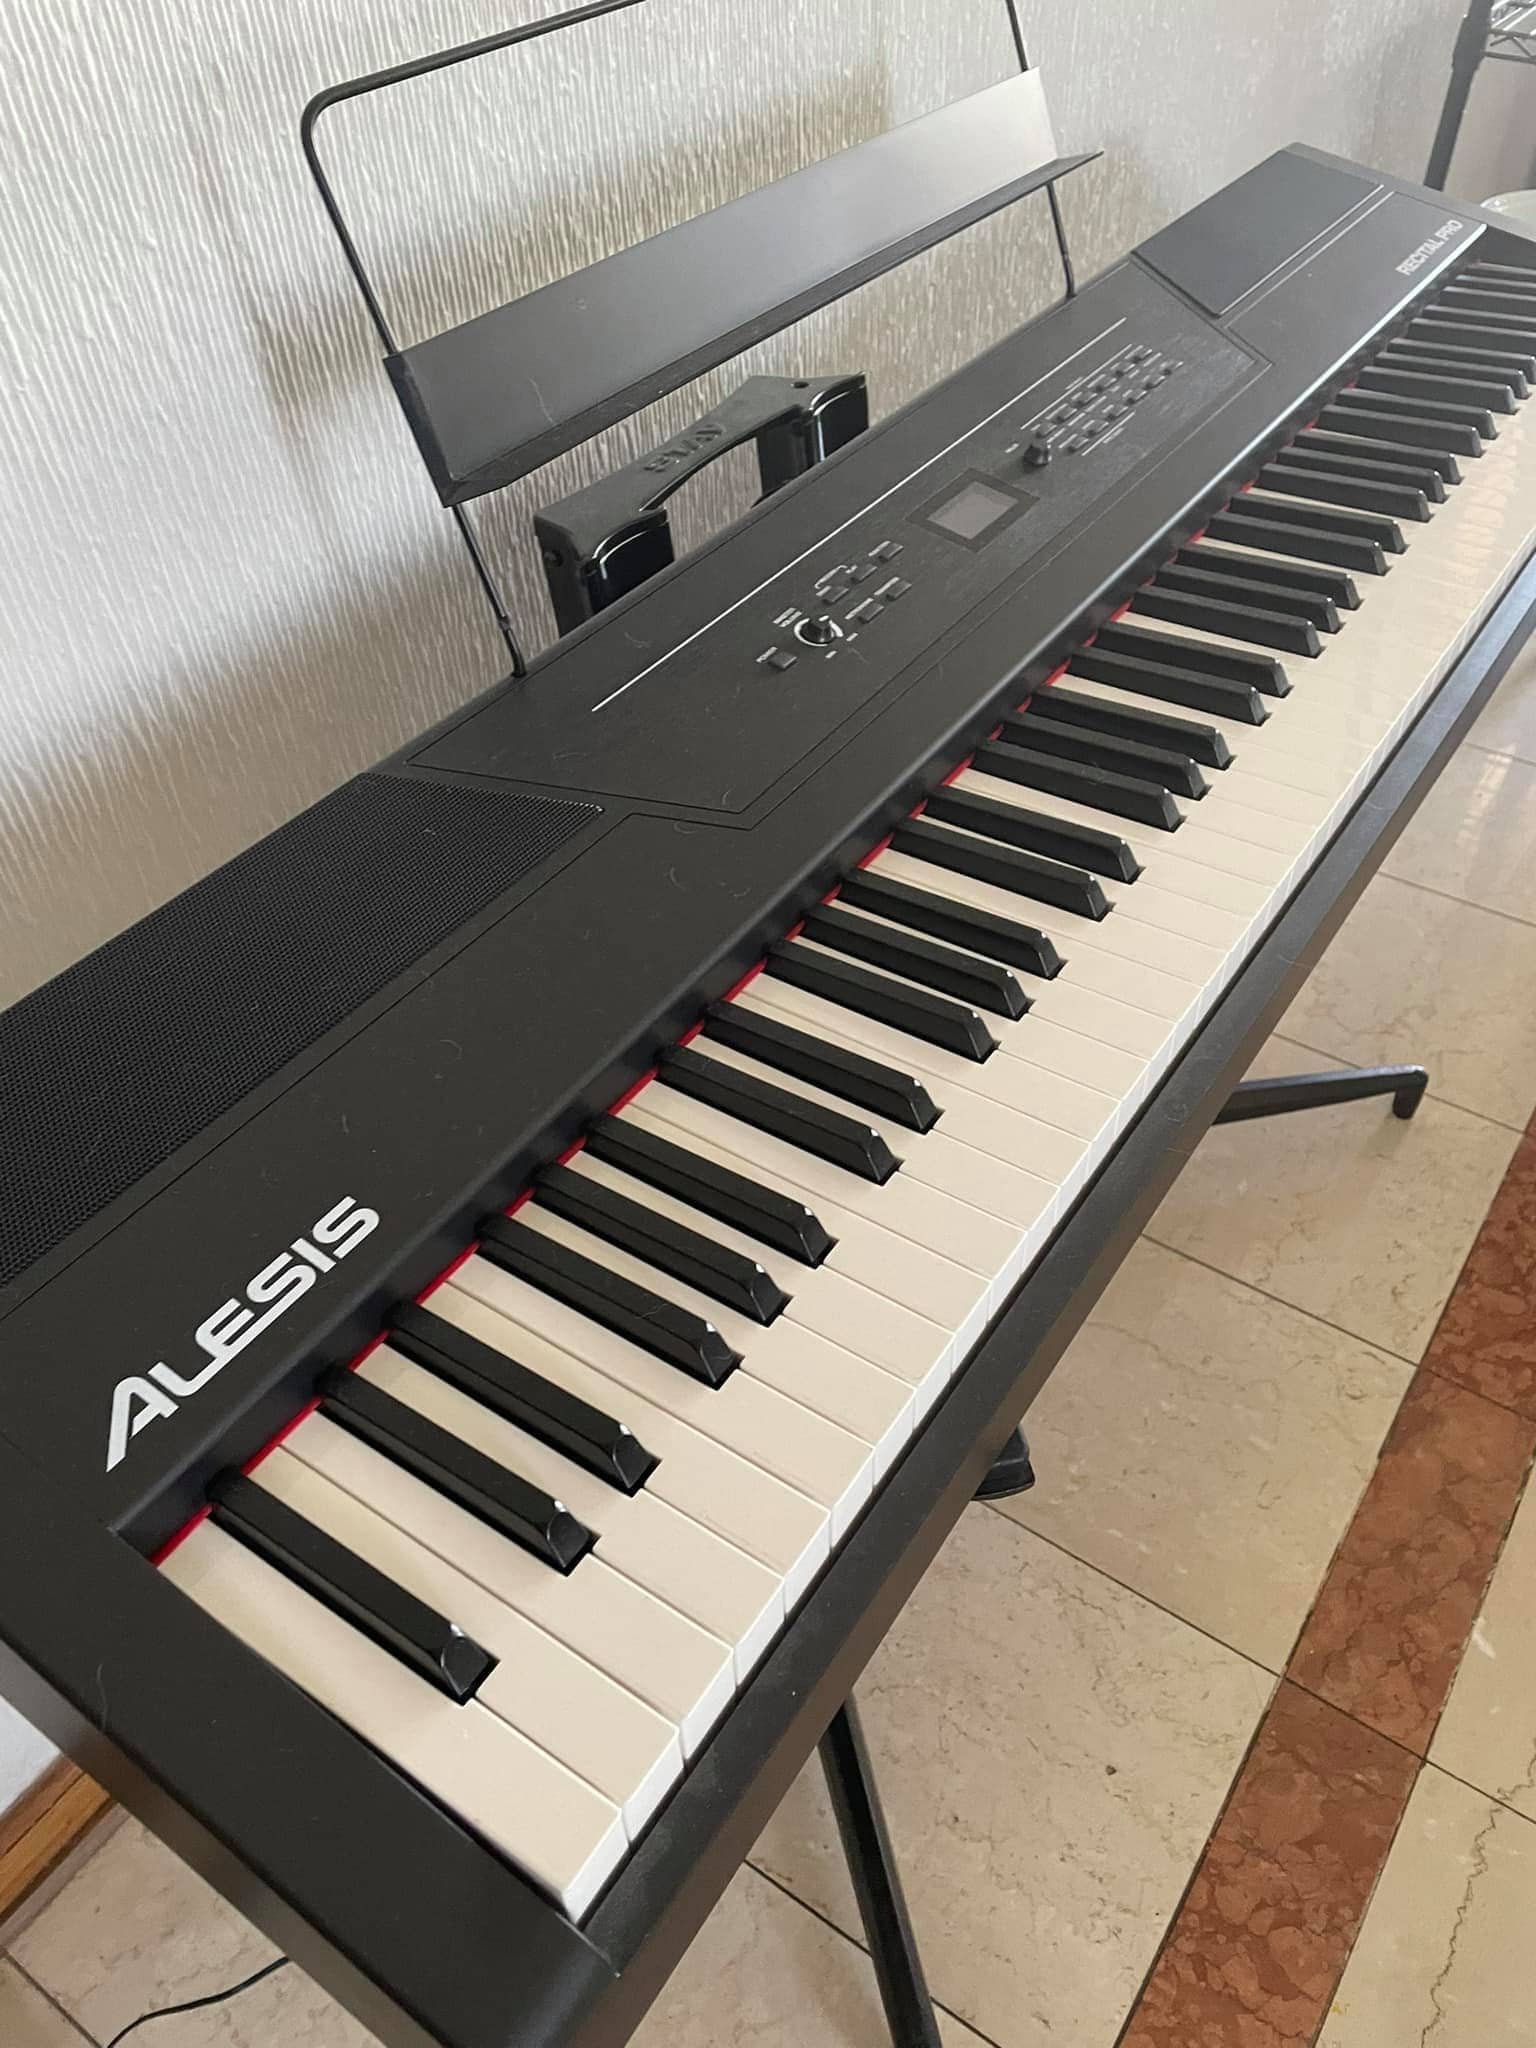 The Alesis Recital comes with textured keys with a nice coating